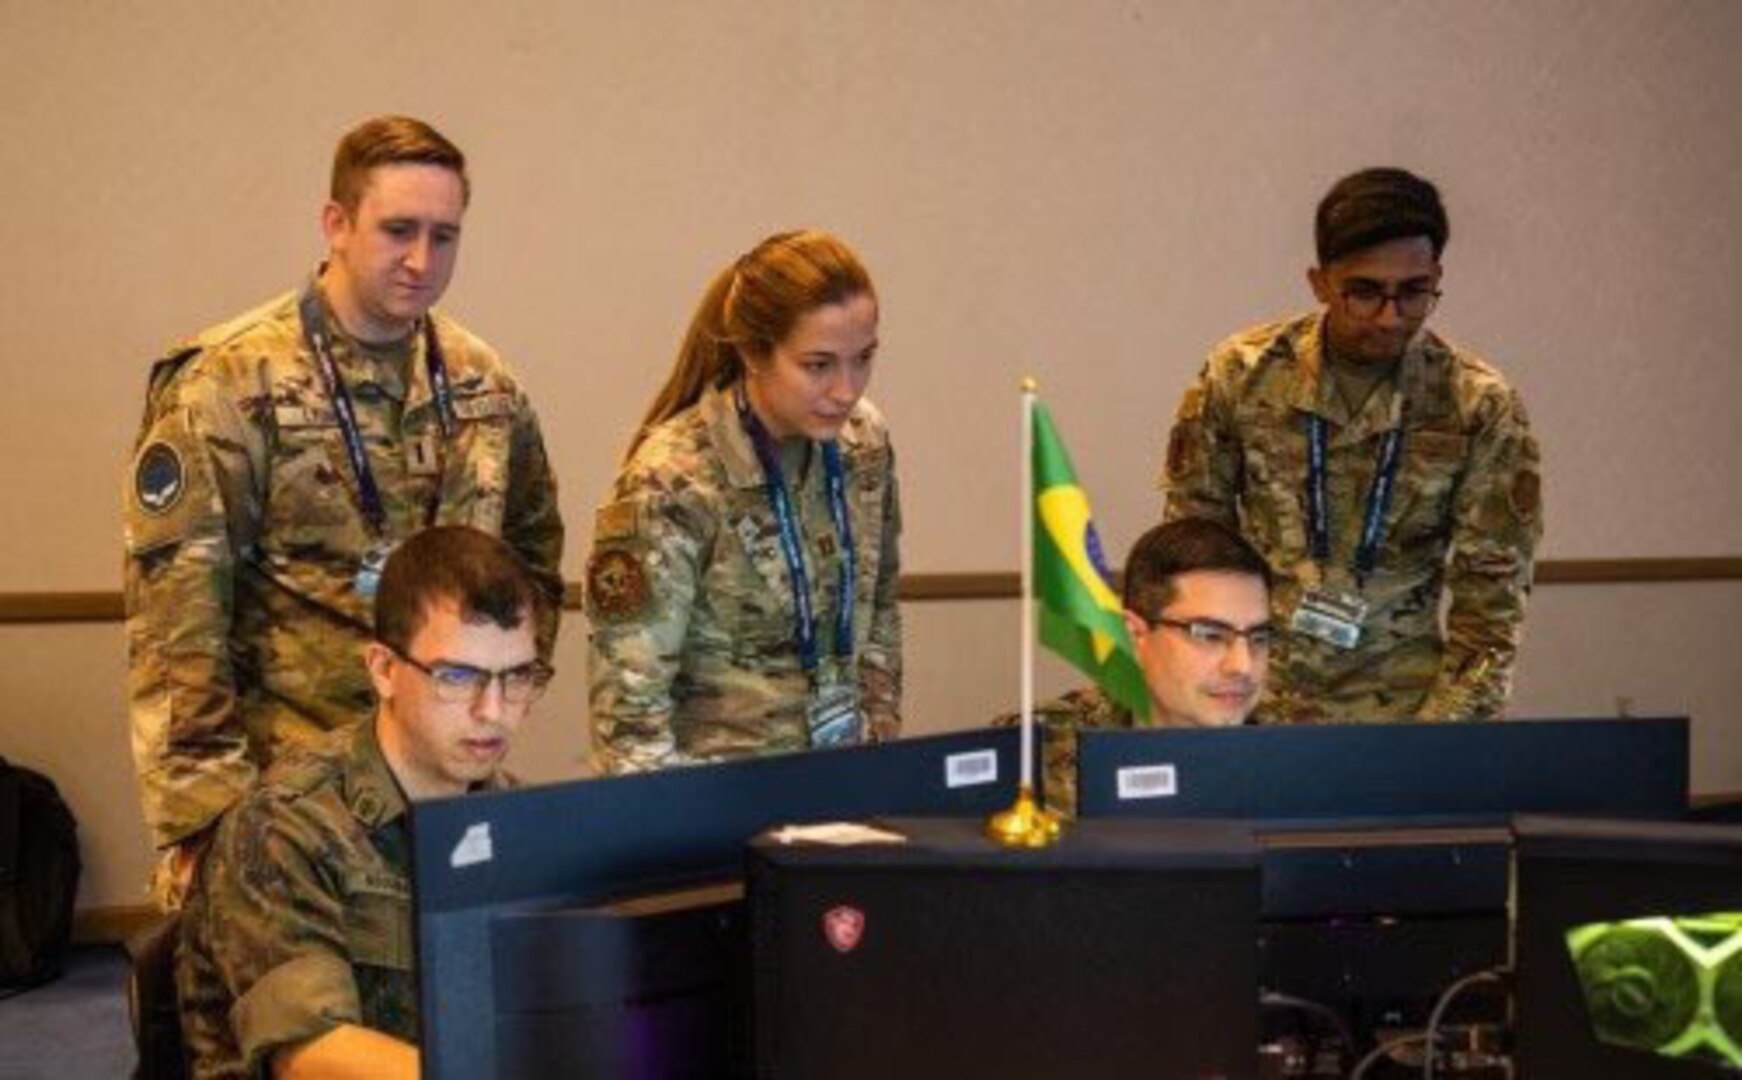 Air Force Capt. Leah Elsbeck, center, and Senior Airman Dhruva Poluru, members of the New York Air National Guard’s 222nd Command and Control Squadron, watch as members of the Brazilian military’s space control team solve a problem during the U.S. Space Command’s Global Sentinel exercise at Vandenberg Space Force Base in July 2022. Elsbeck and Poluru, along with Capt. Victoria Whelan, served as mentors during the exercise.